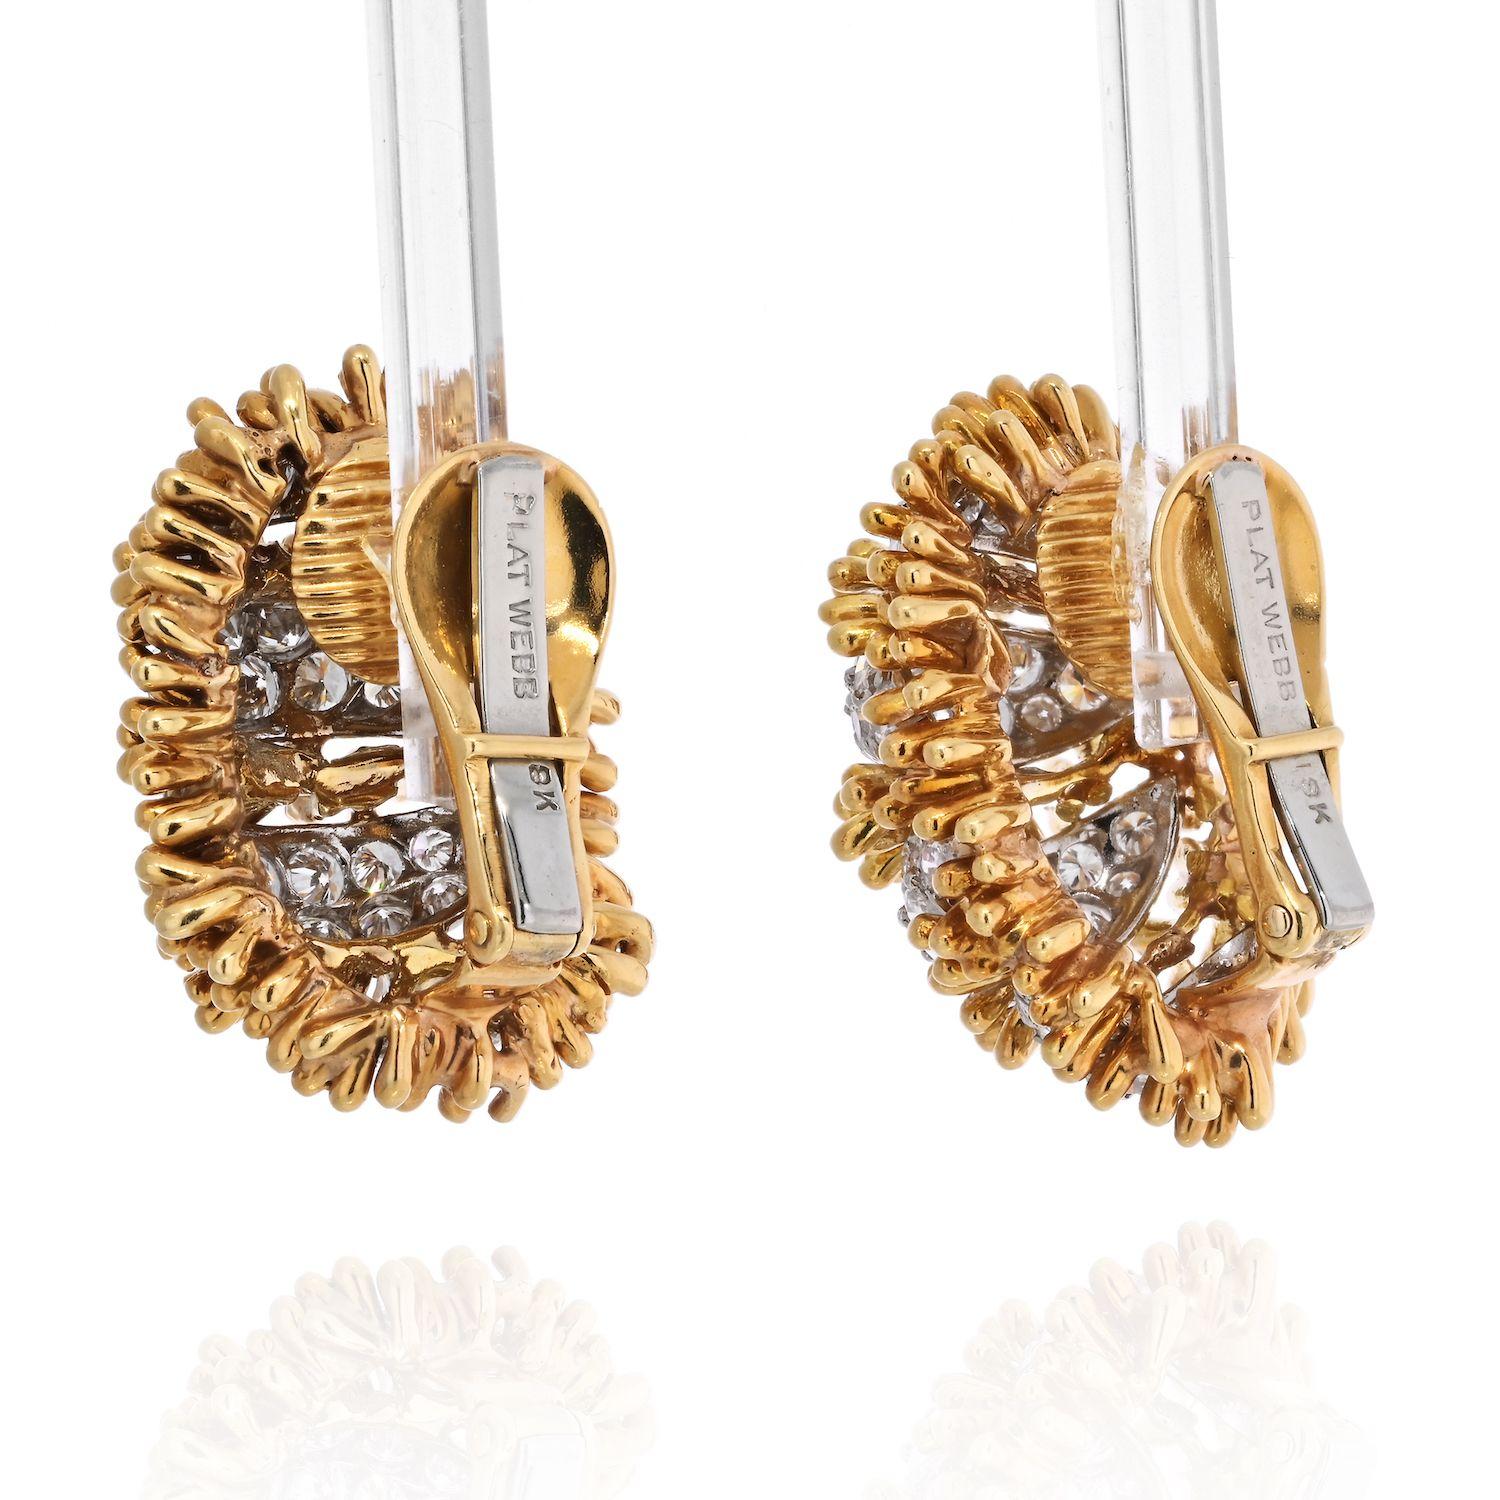 Designed by quintessential top drawer  American jeweler David Webb, c. 1970, each crafted in platinum, polished 18K yellow gold and diamonds.
David Webb ear clips have a domed yellow gold beaded design measuring 26 x 20mm  with each earring